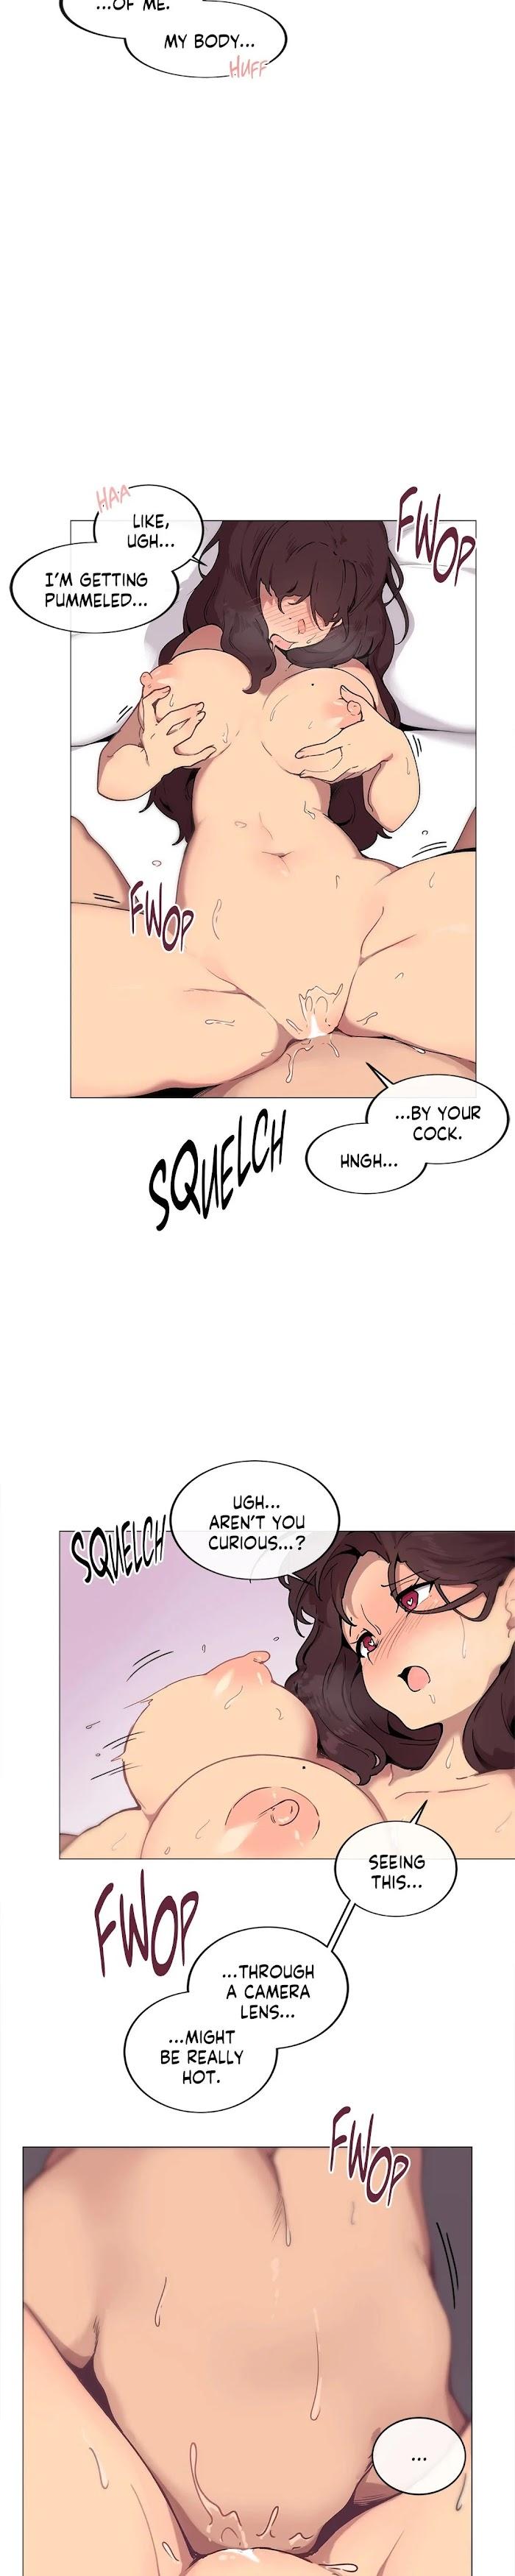 [Dumangoon, 130F] Sexcape Room: Wipe Out Ch.9/9 [English] [Manhwa PDF] Completed 176